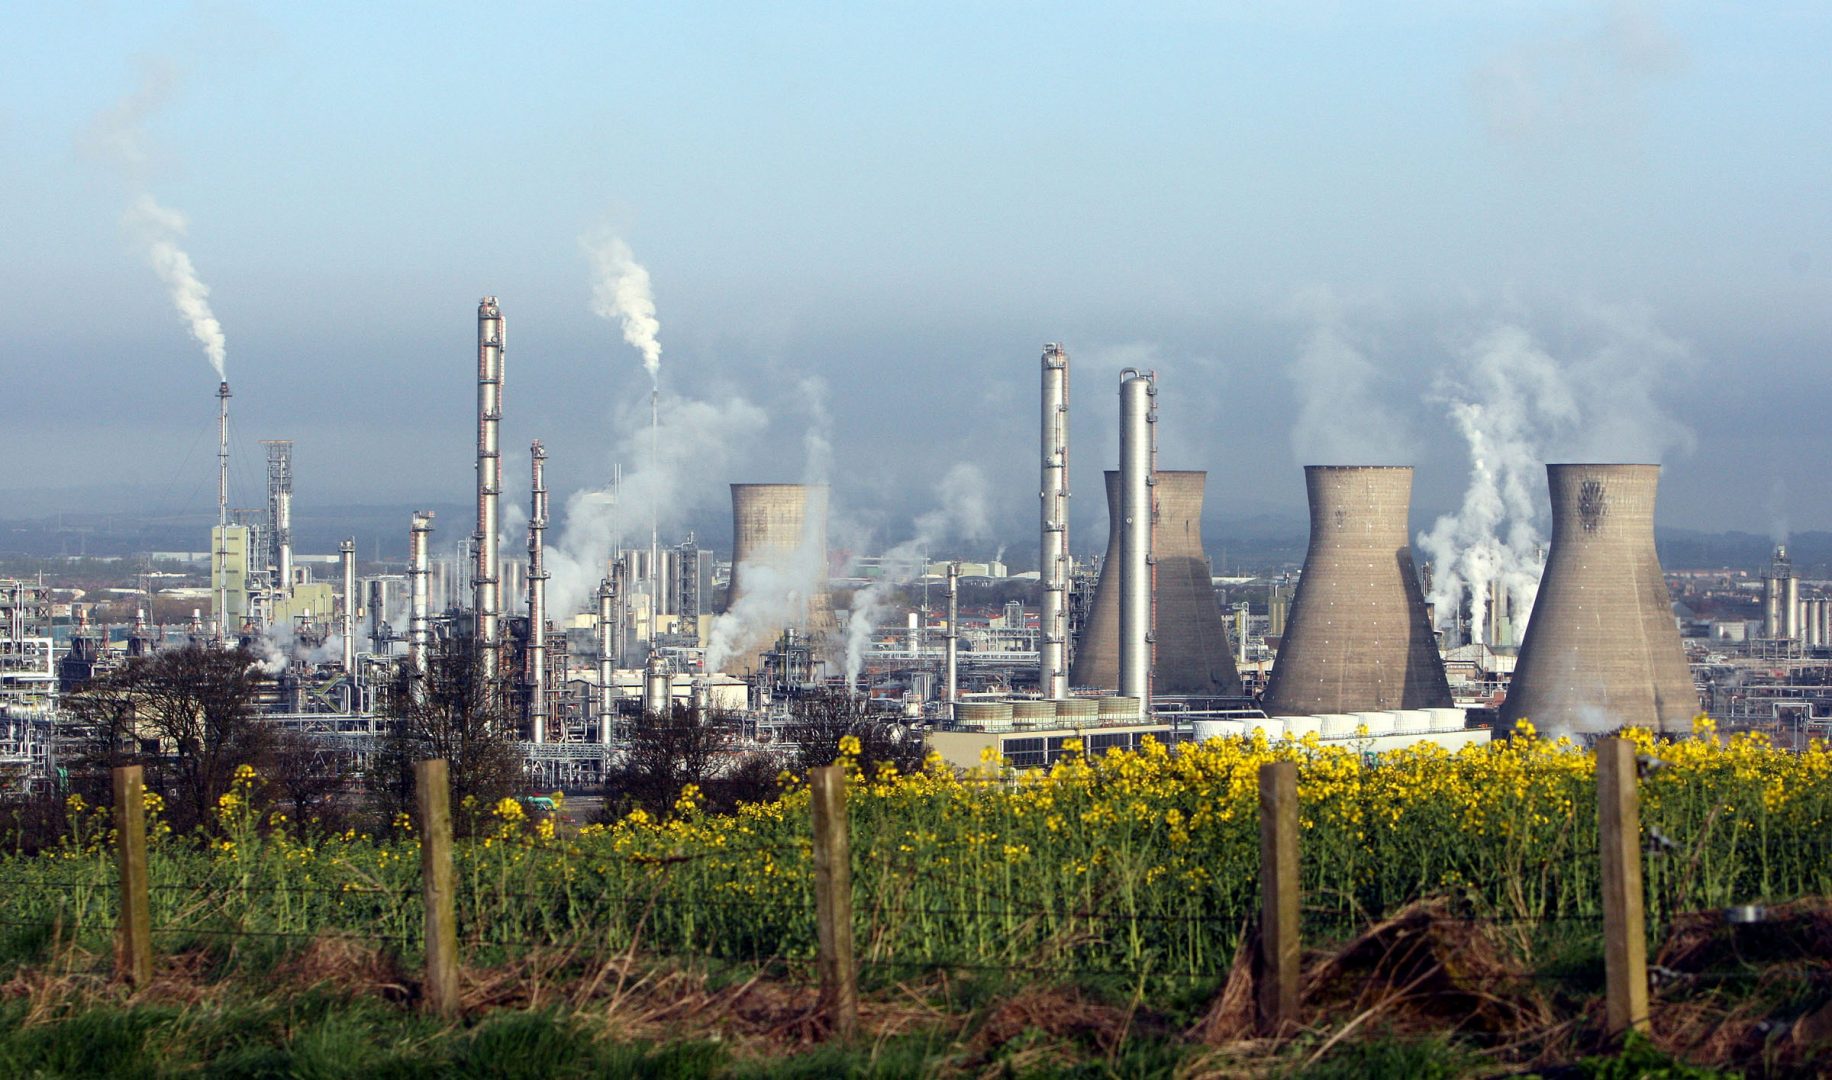 This 2008 file photo shows a view of the INEOS refinery at Grangemouth, Scotland, where ethane imported from Pennsylvania is processed and turned into plastic.  